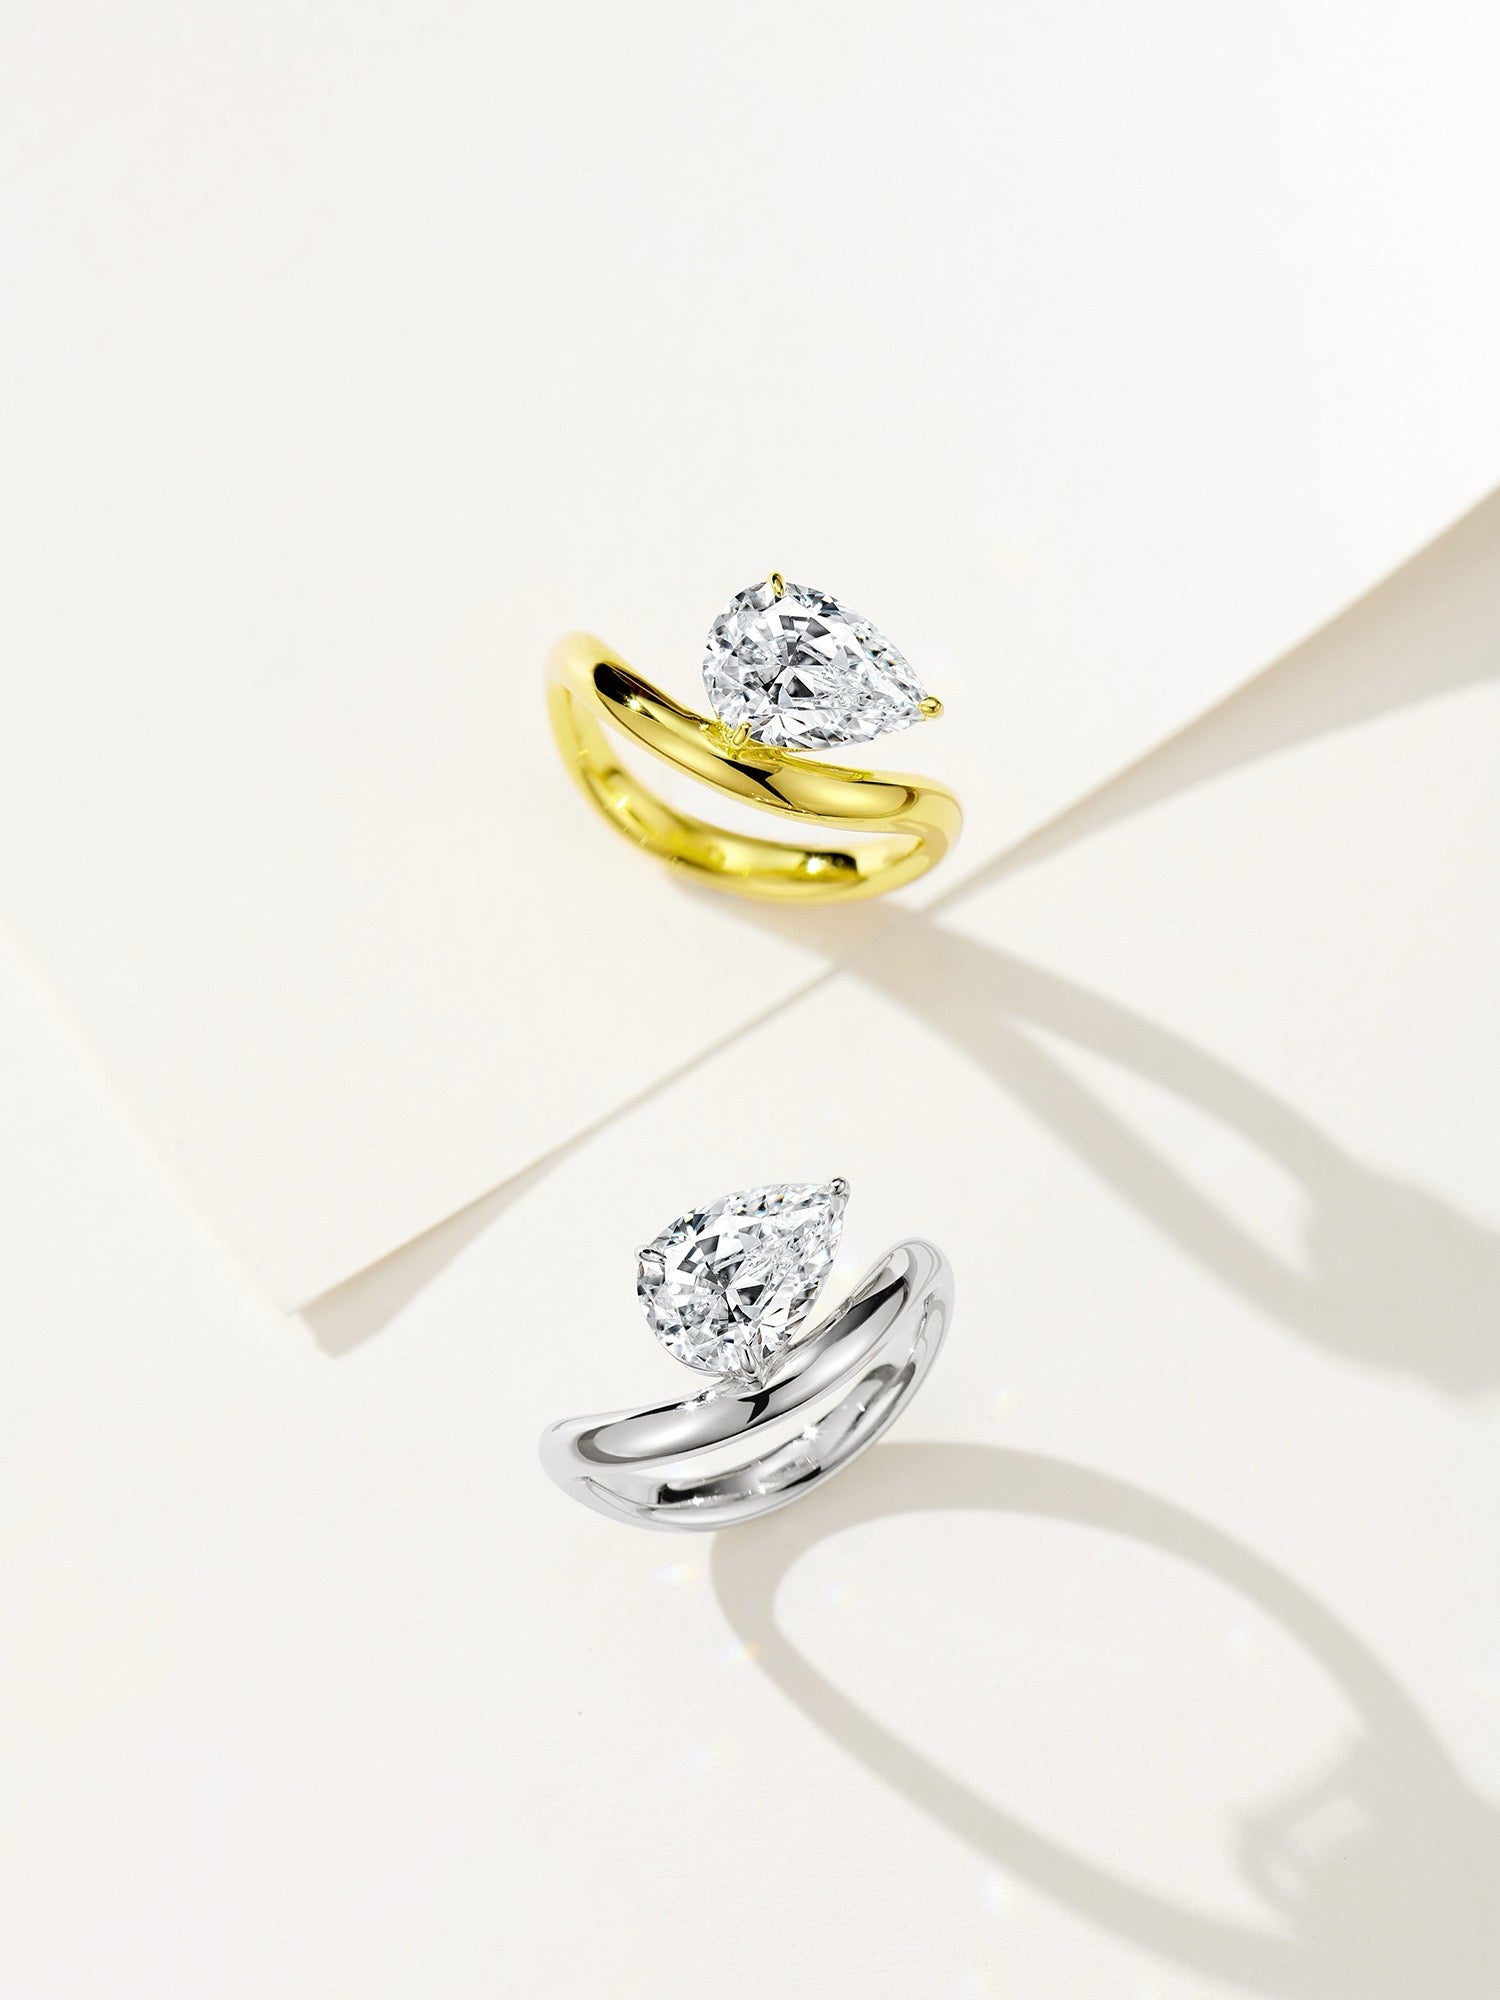 Elegant Contours: Pear-Shaped Natural Zircon Set in Gold-Plated Silver Rings